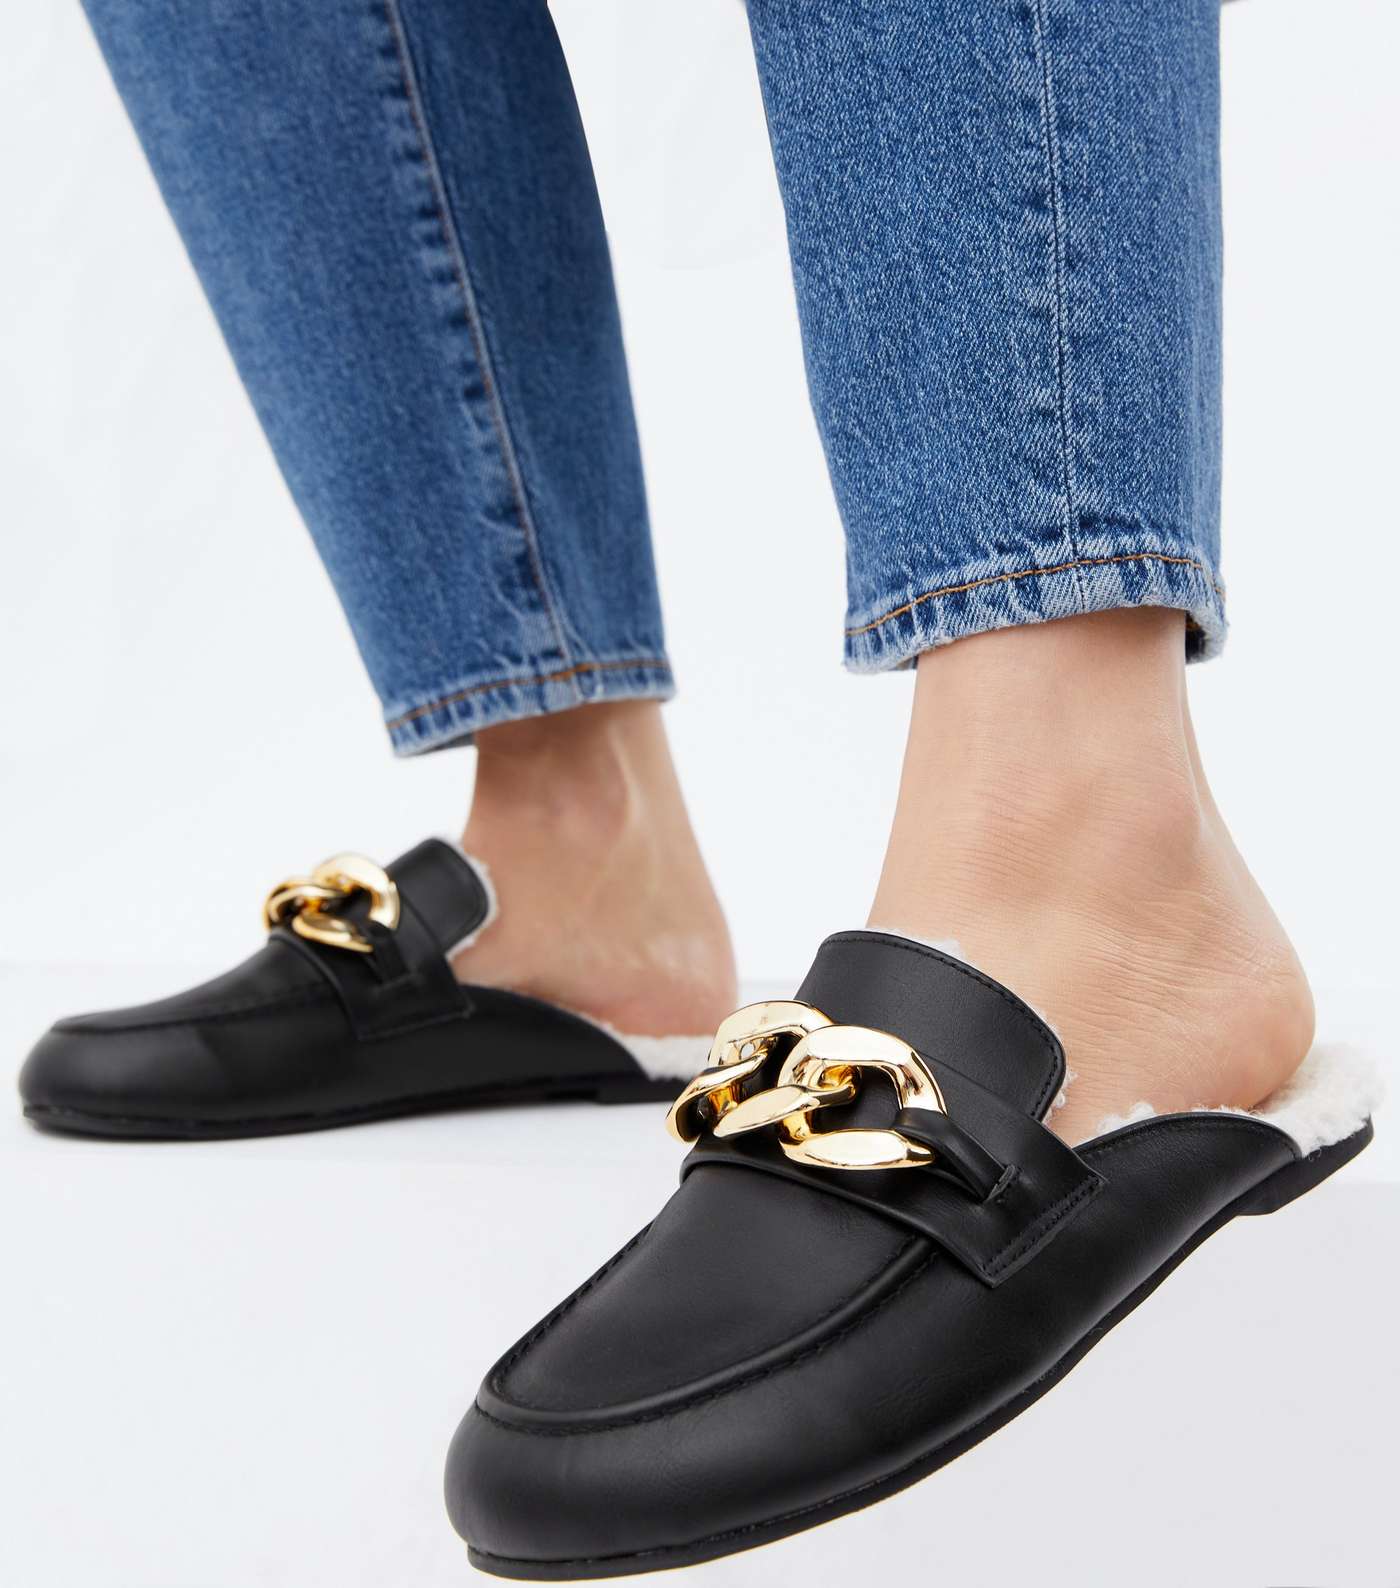 Black Teddy Lined Chain Mule Slippers